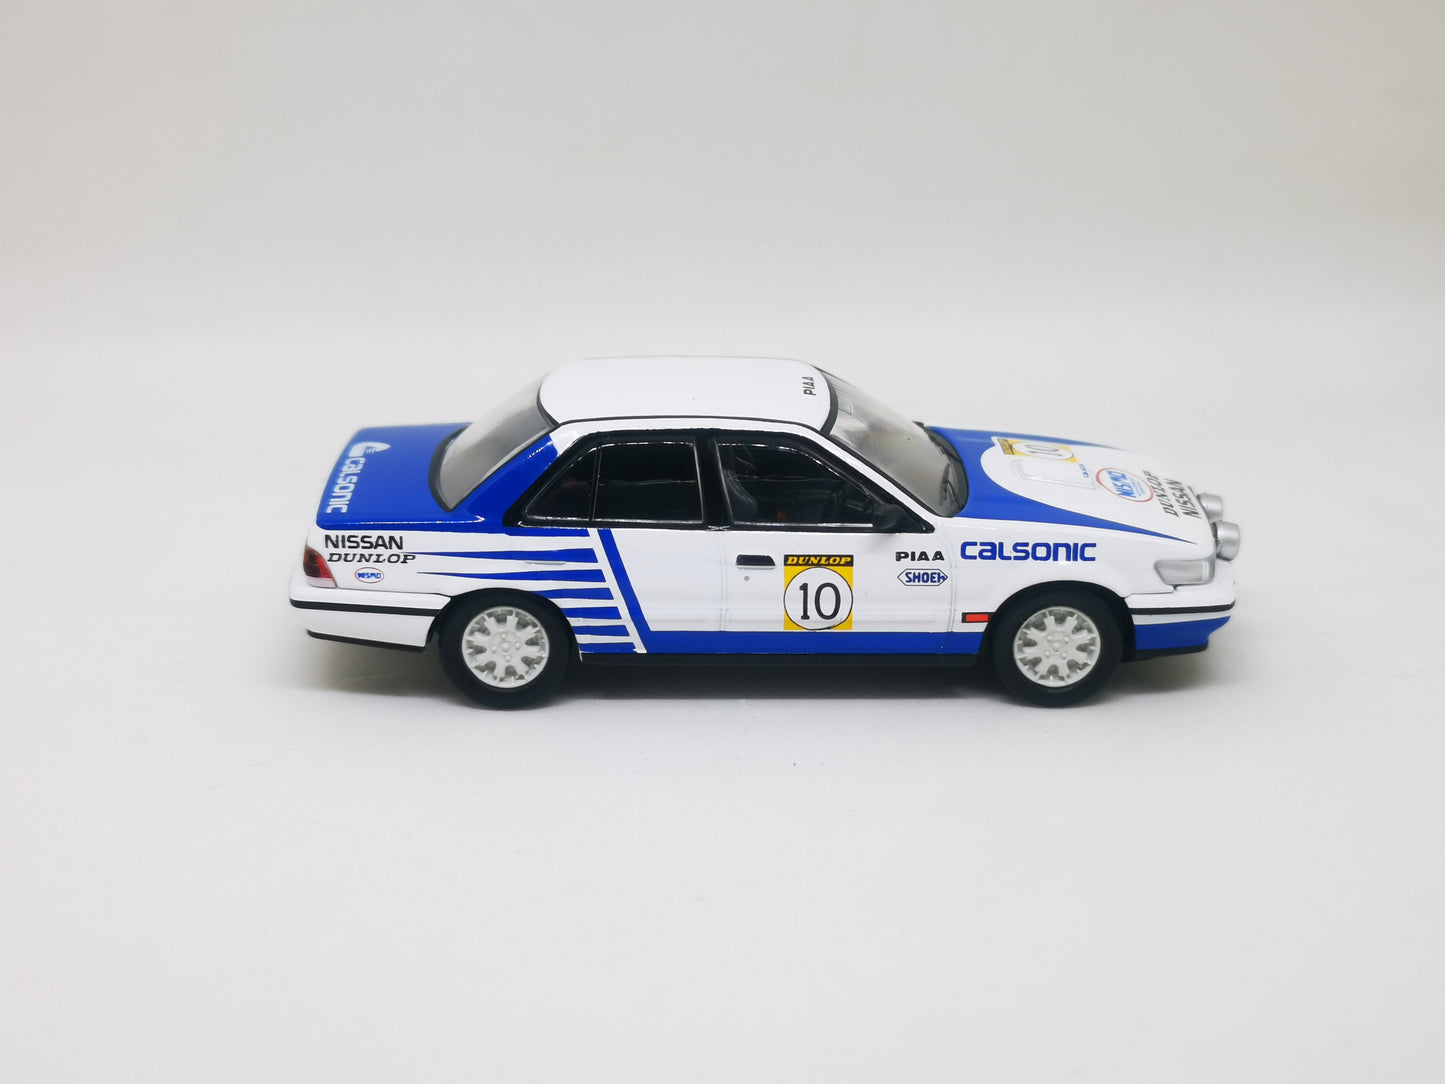 Tomica Limited Vintage Neo Nissan Blue Bird SSS R Calsonic #10